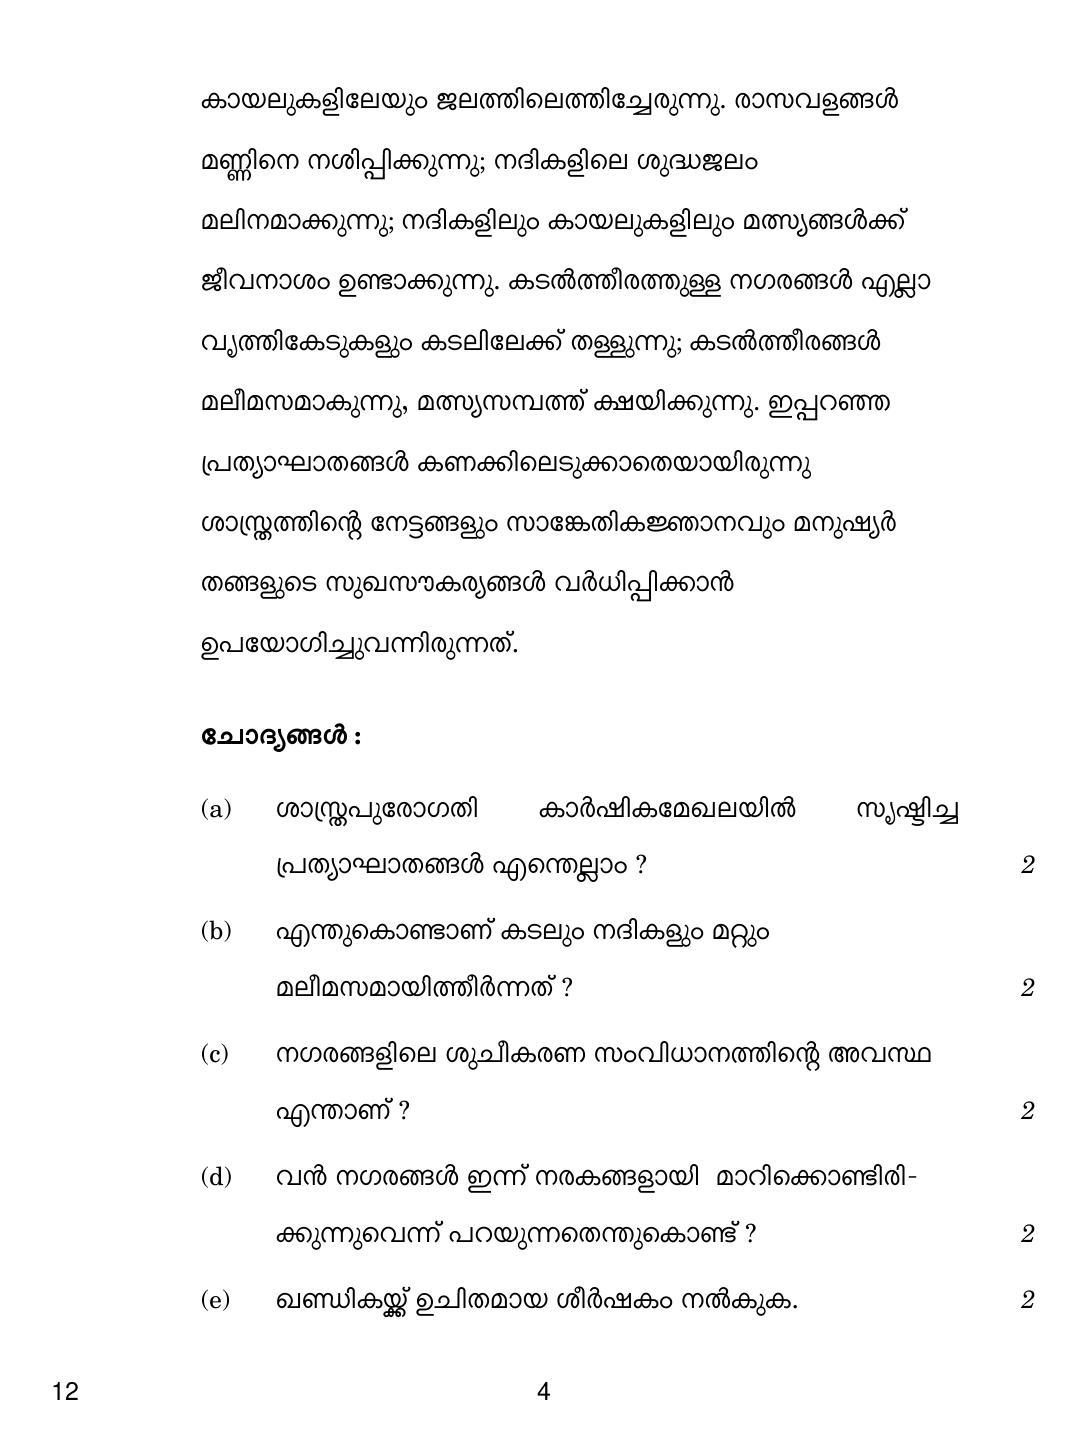 CBSE Class 12 12 Malayalam 2019 Compartment Question Paper - Page 4